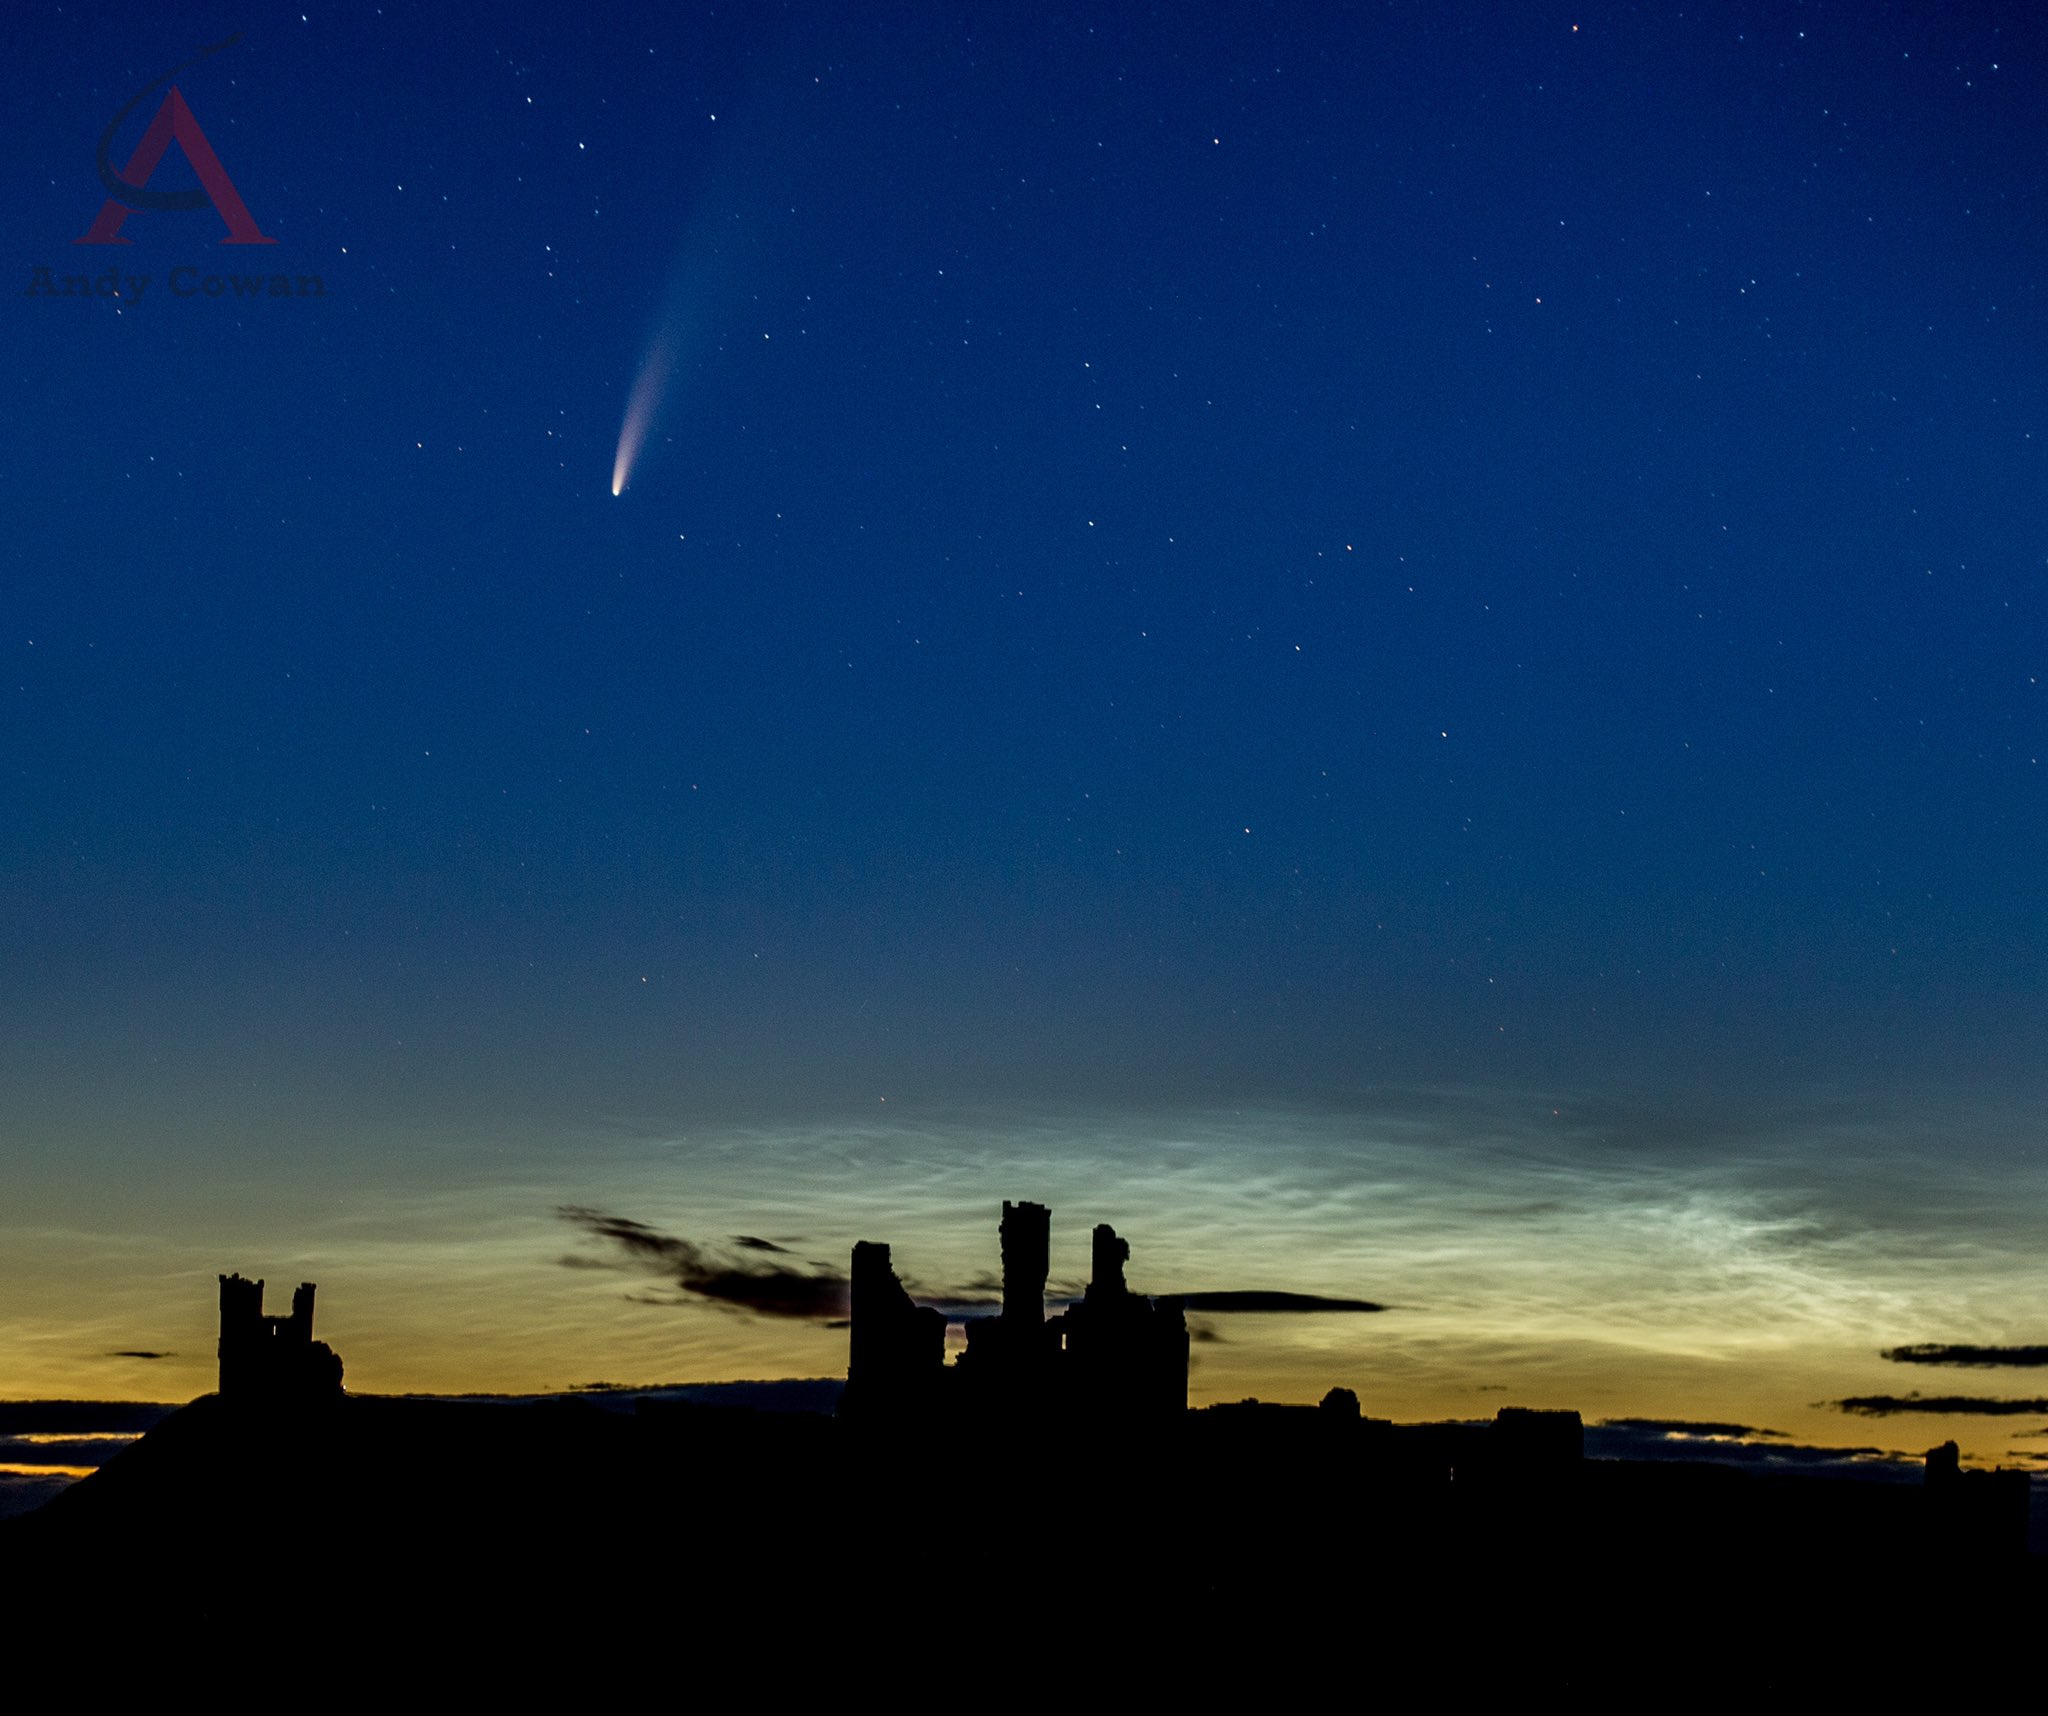 1st Place Comet C/2020 F3 NEOWISE over Dunstanburgh castle in Northumberland with Noctilucent clouds by Andrew Cowan @andycowanphotos